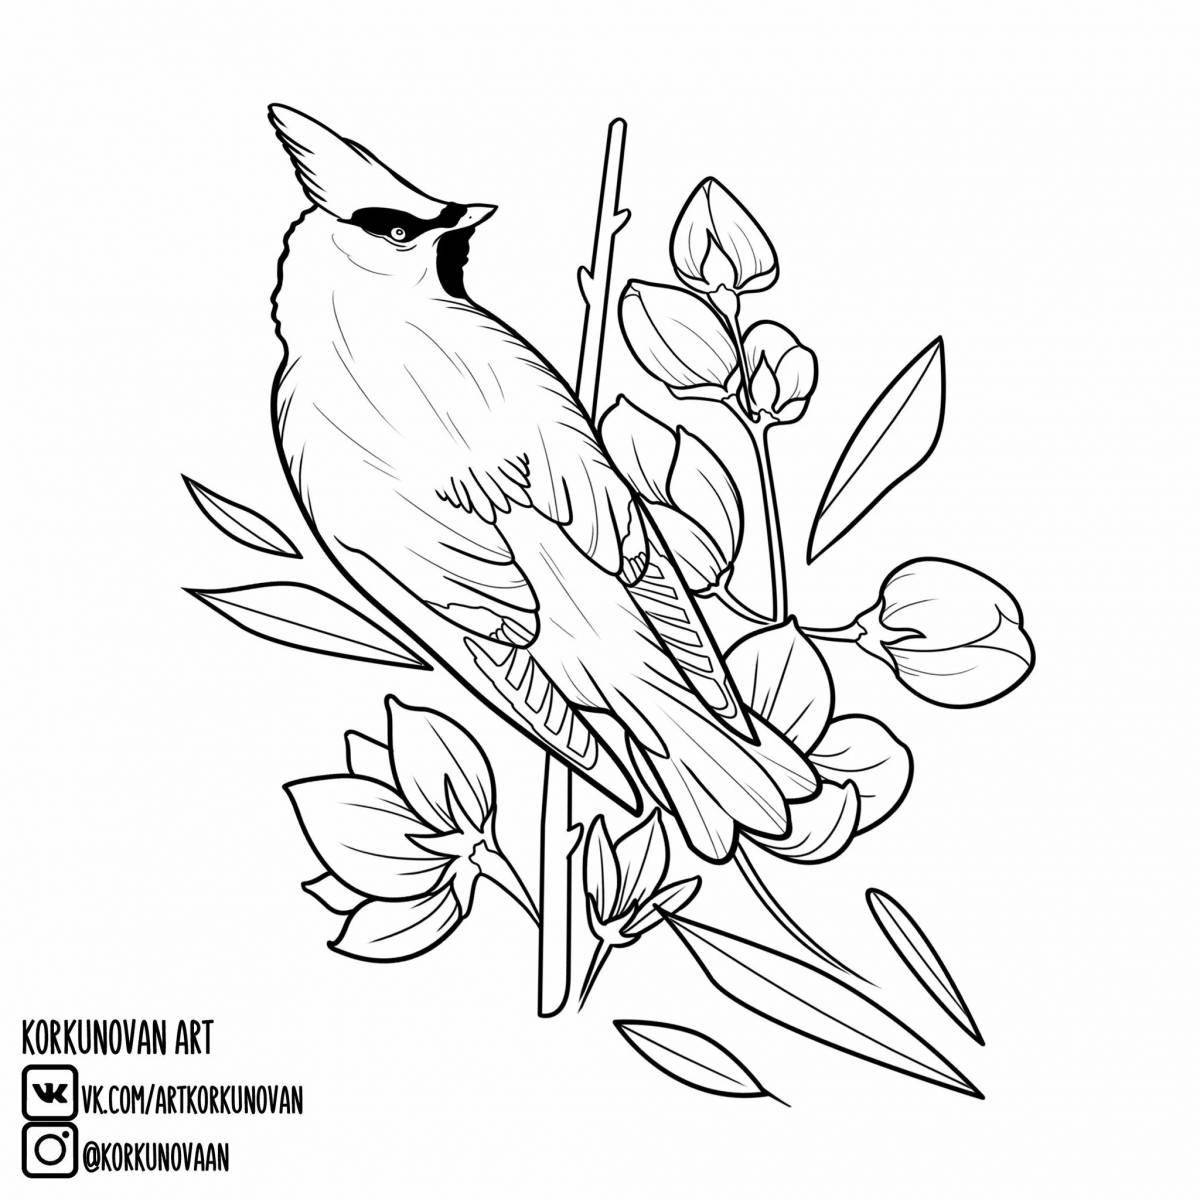 Fascinating waxwing coloring book for kids